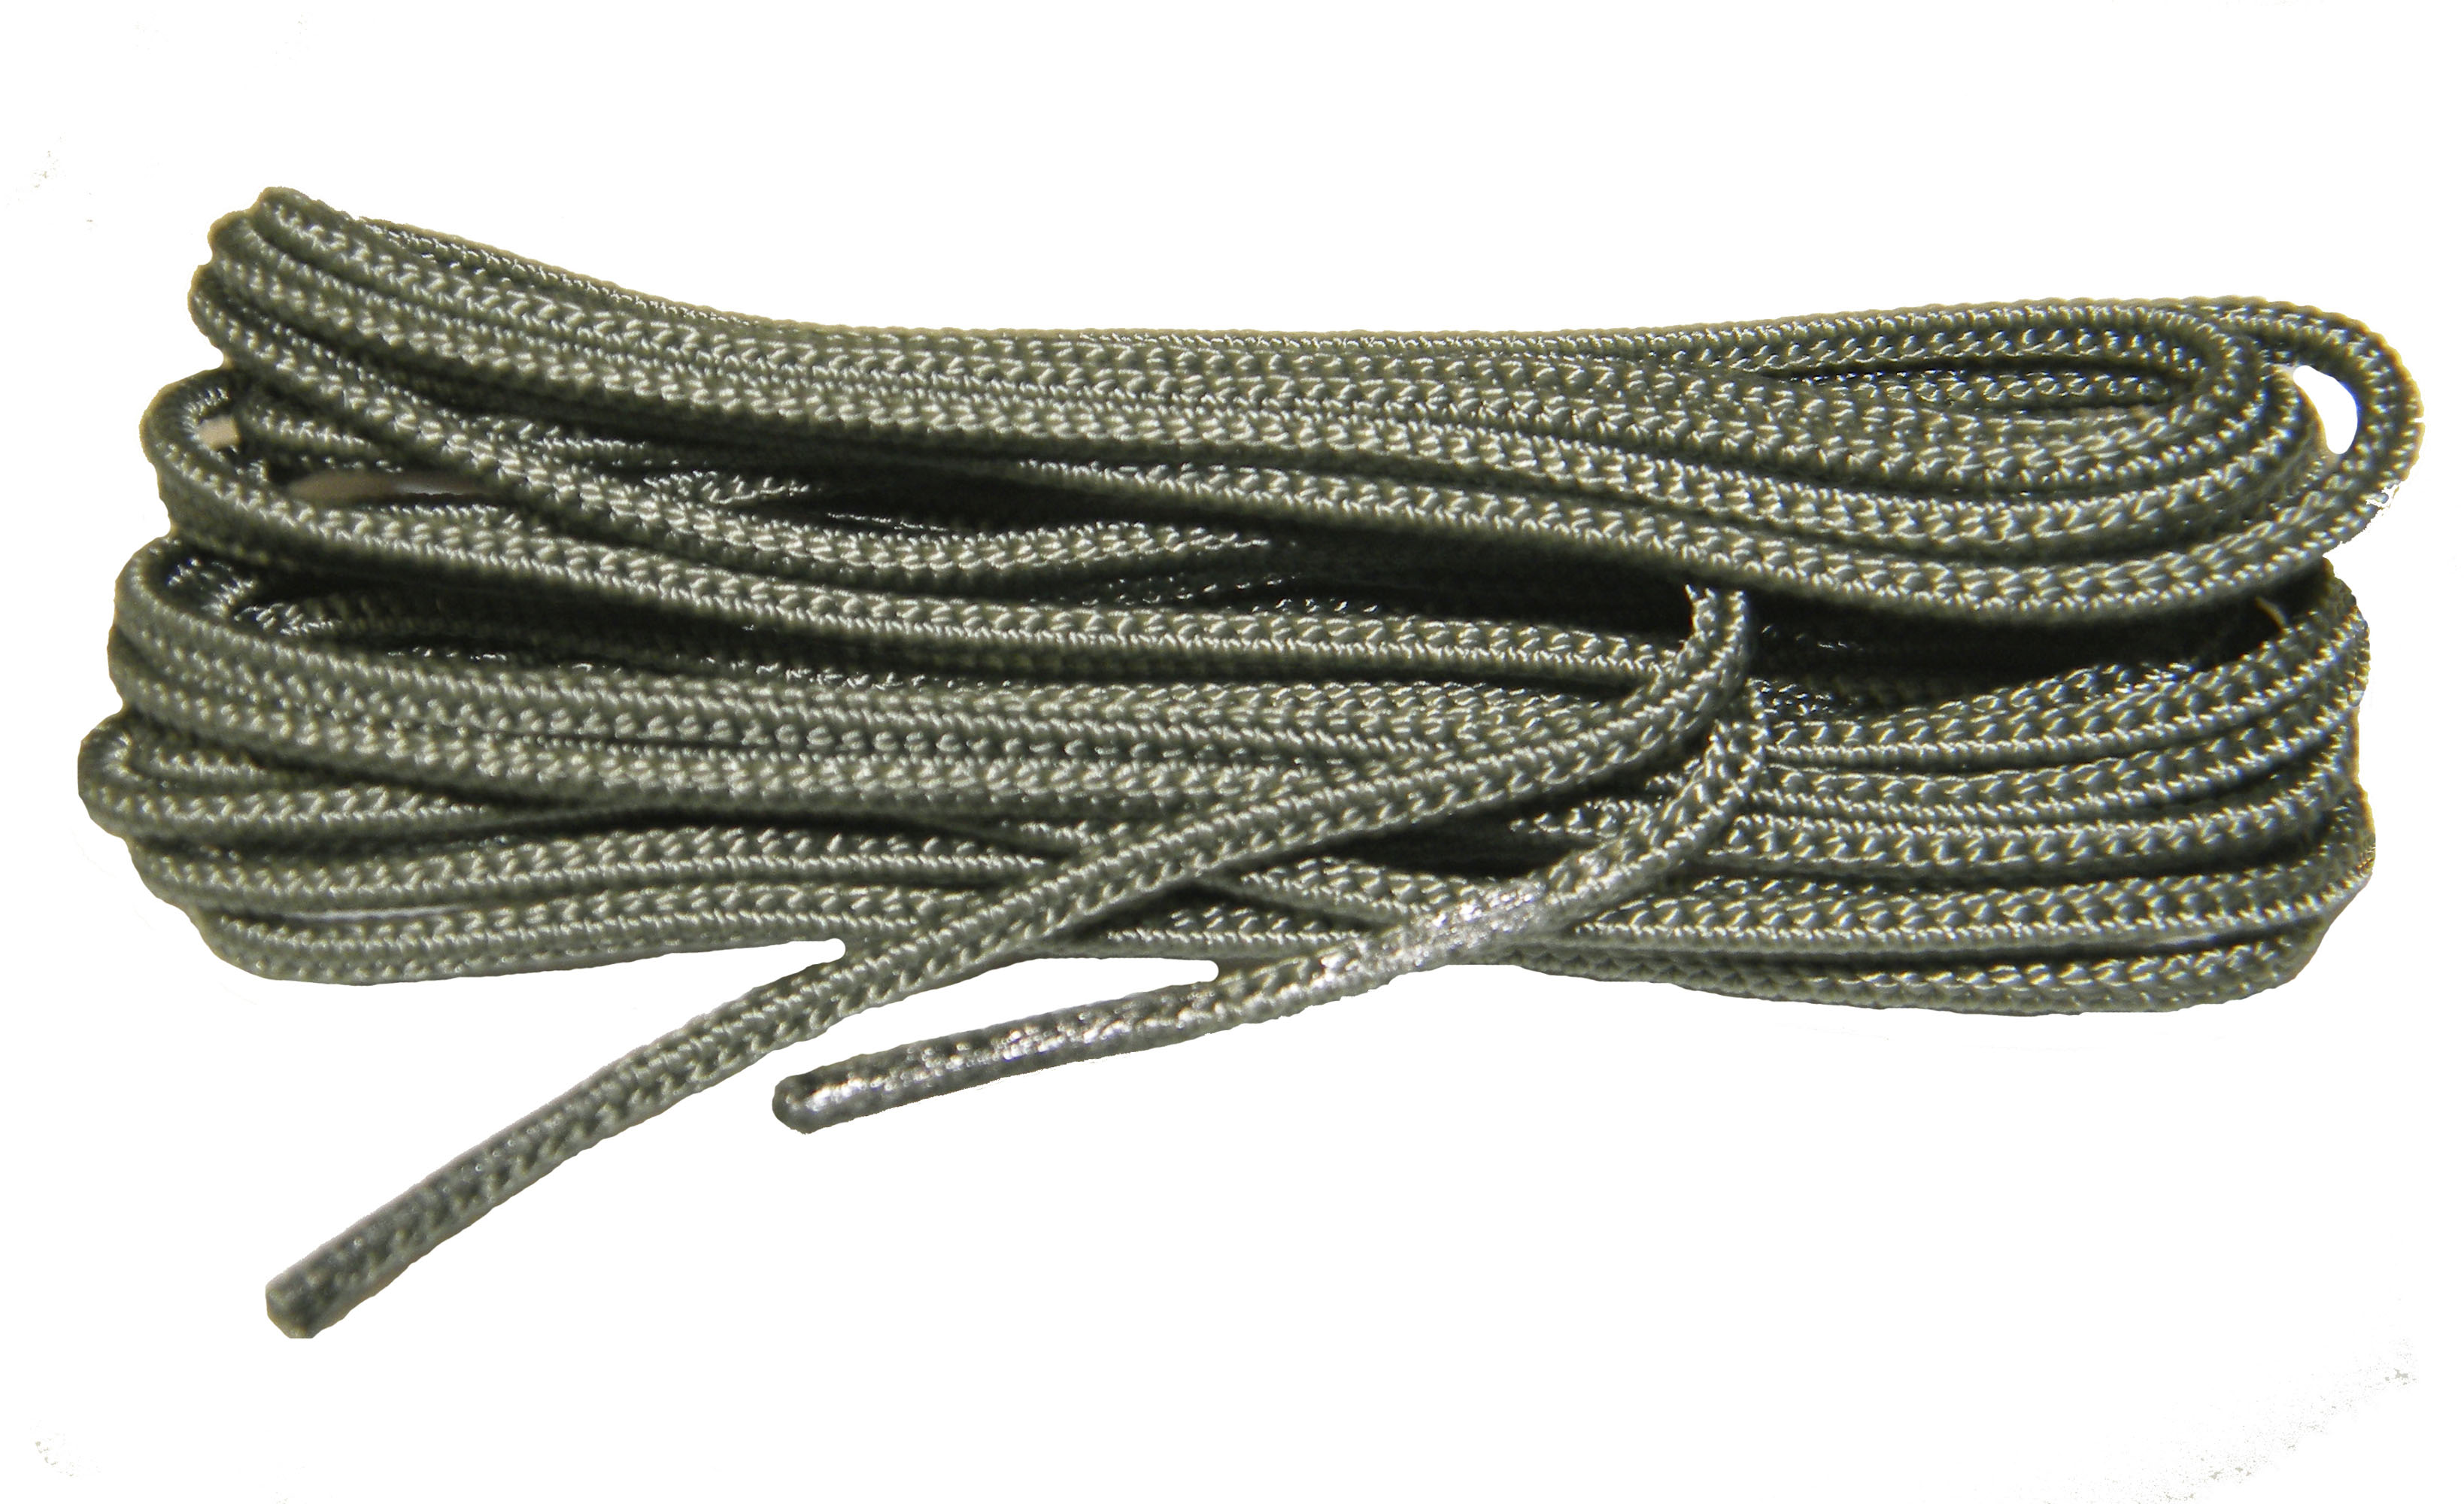 48 Inch 122 cm US Air Force Sage Green Nylon Speedlace; Tactical Combat Boot Laces; Fused aglet shoelaces (2 Pair Pack) - image 1 of 1